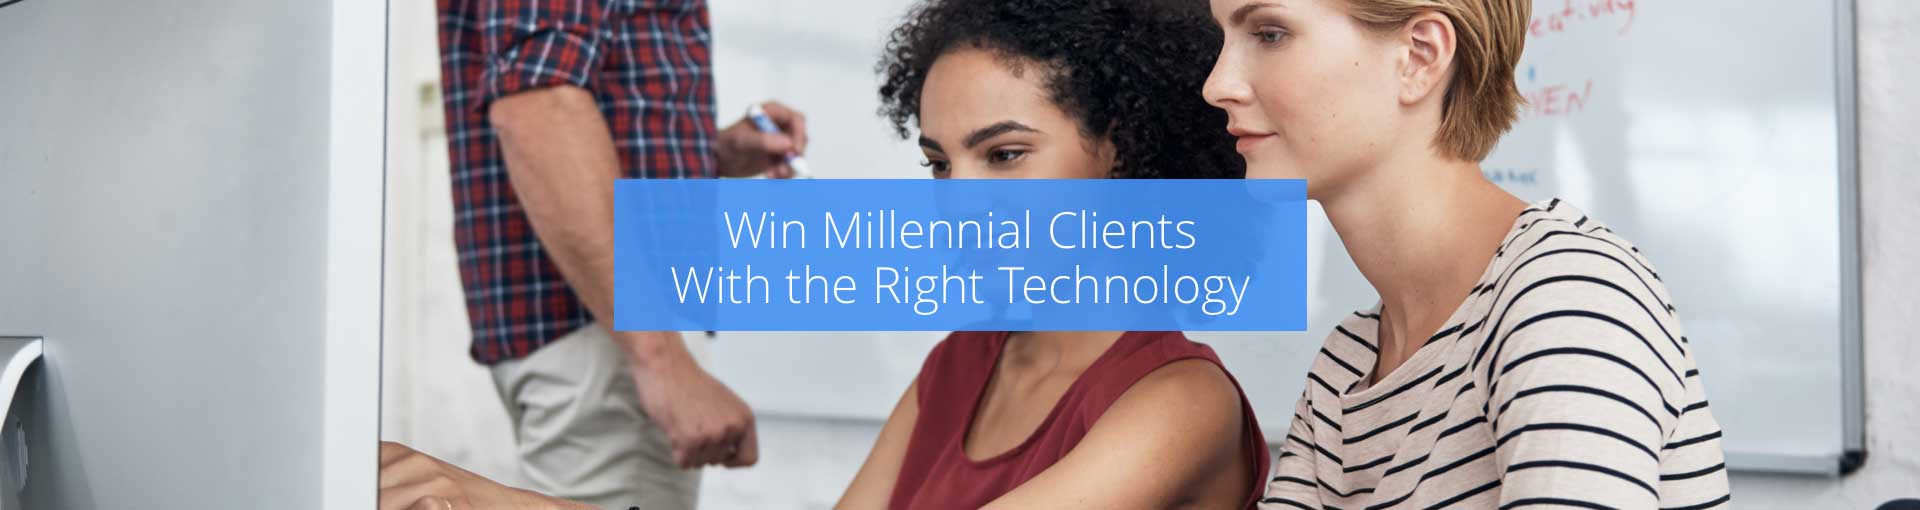 Win Millennial Clients With the Right Technology